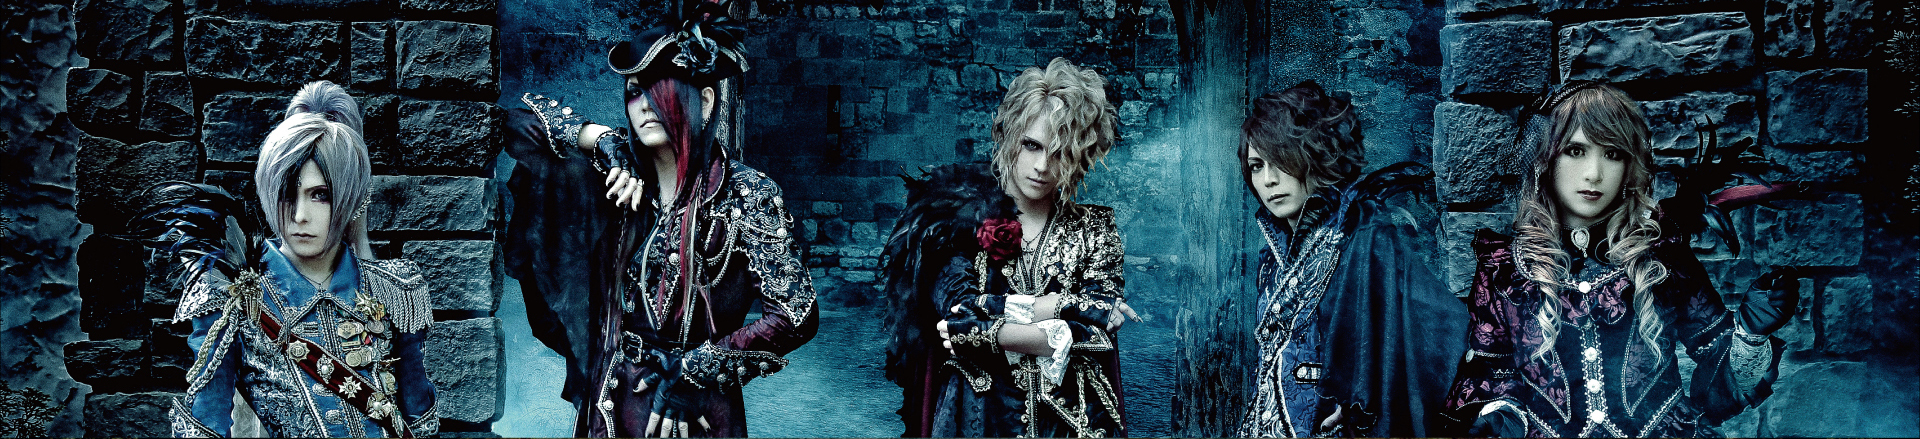 Versailles Makes a Comeback With an Announcement of a New Album